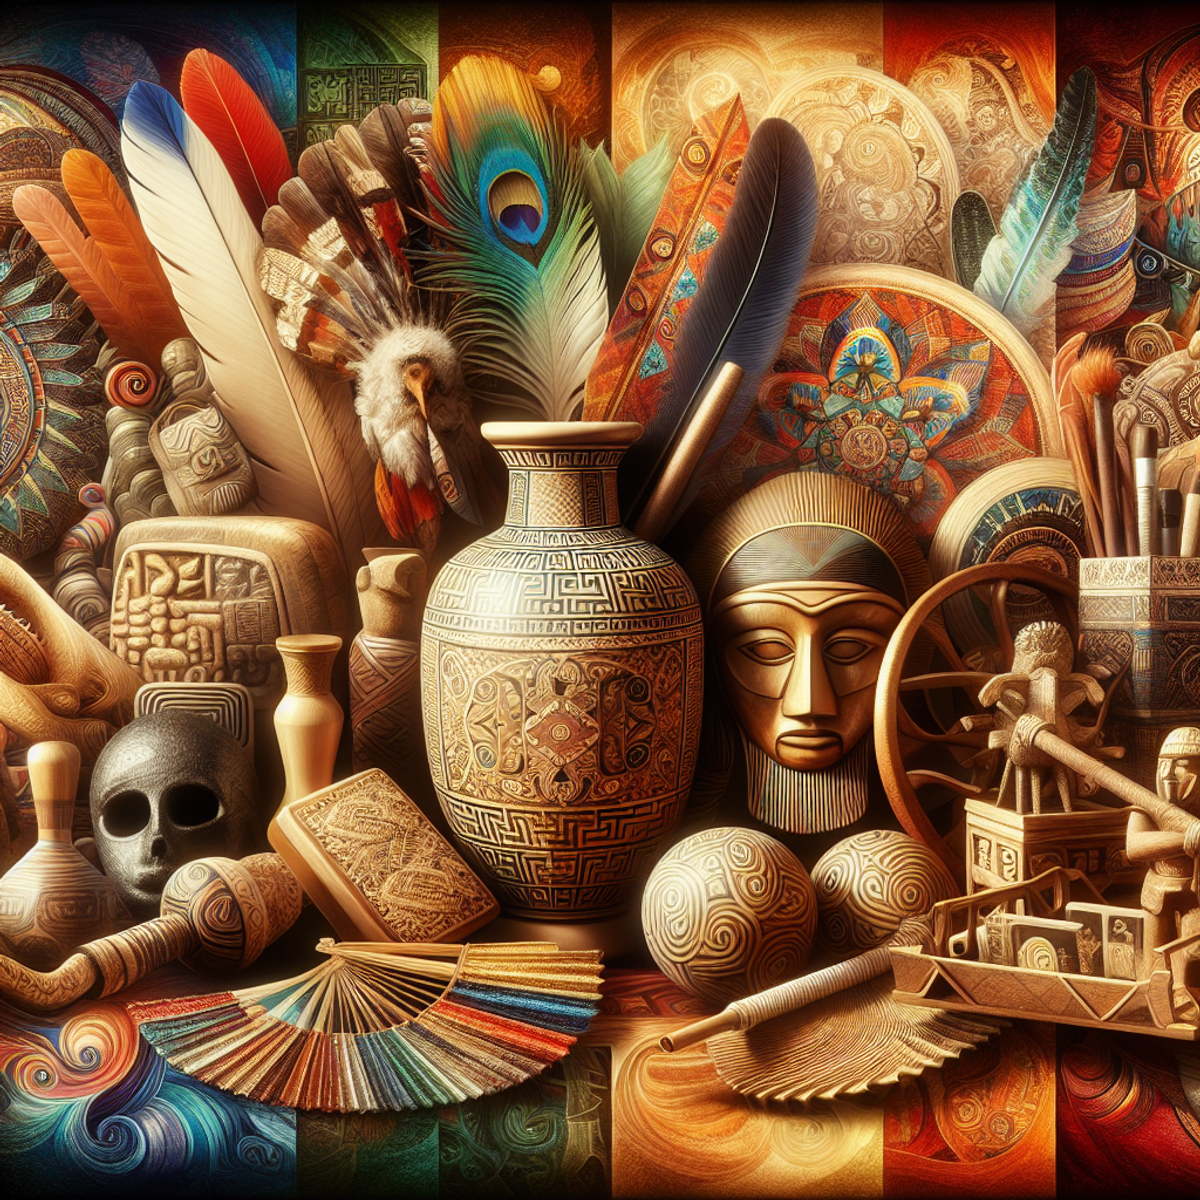 A vibrant collage of global cultural artifacts including a Greek amphora, Aztec mask, Middle Eastern tapestry, African wooden sculptures, South Asian mandala, and East Asian handheld fan.